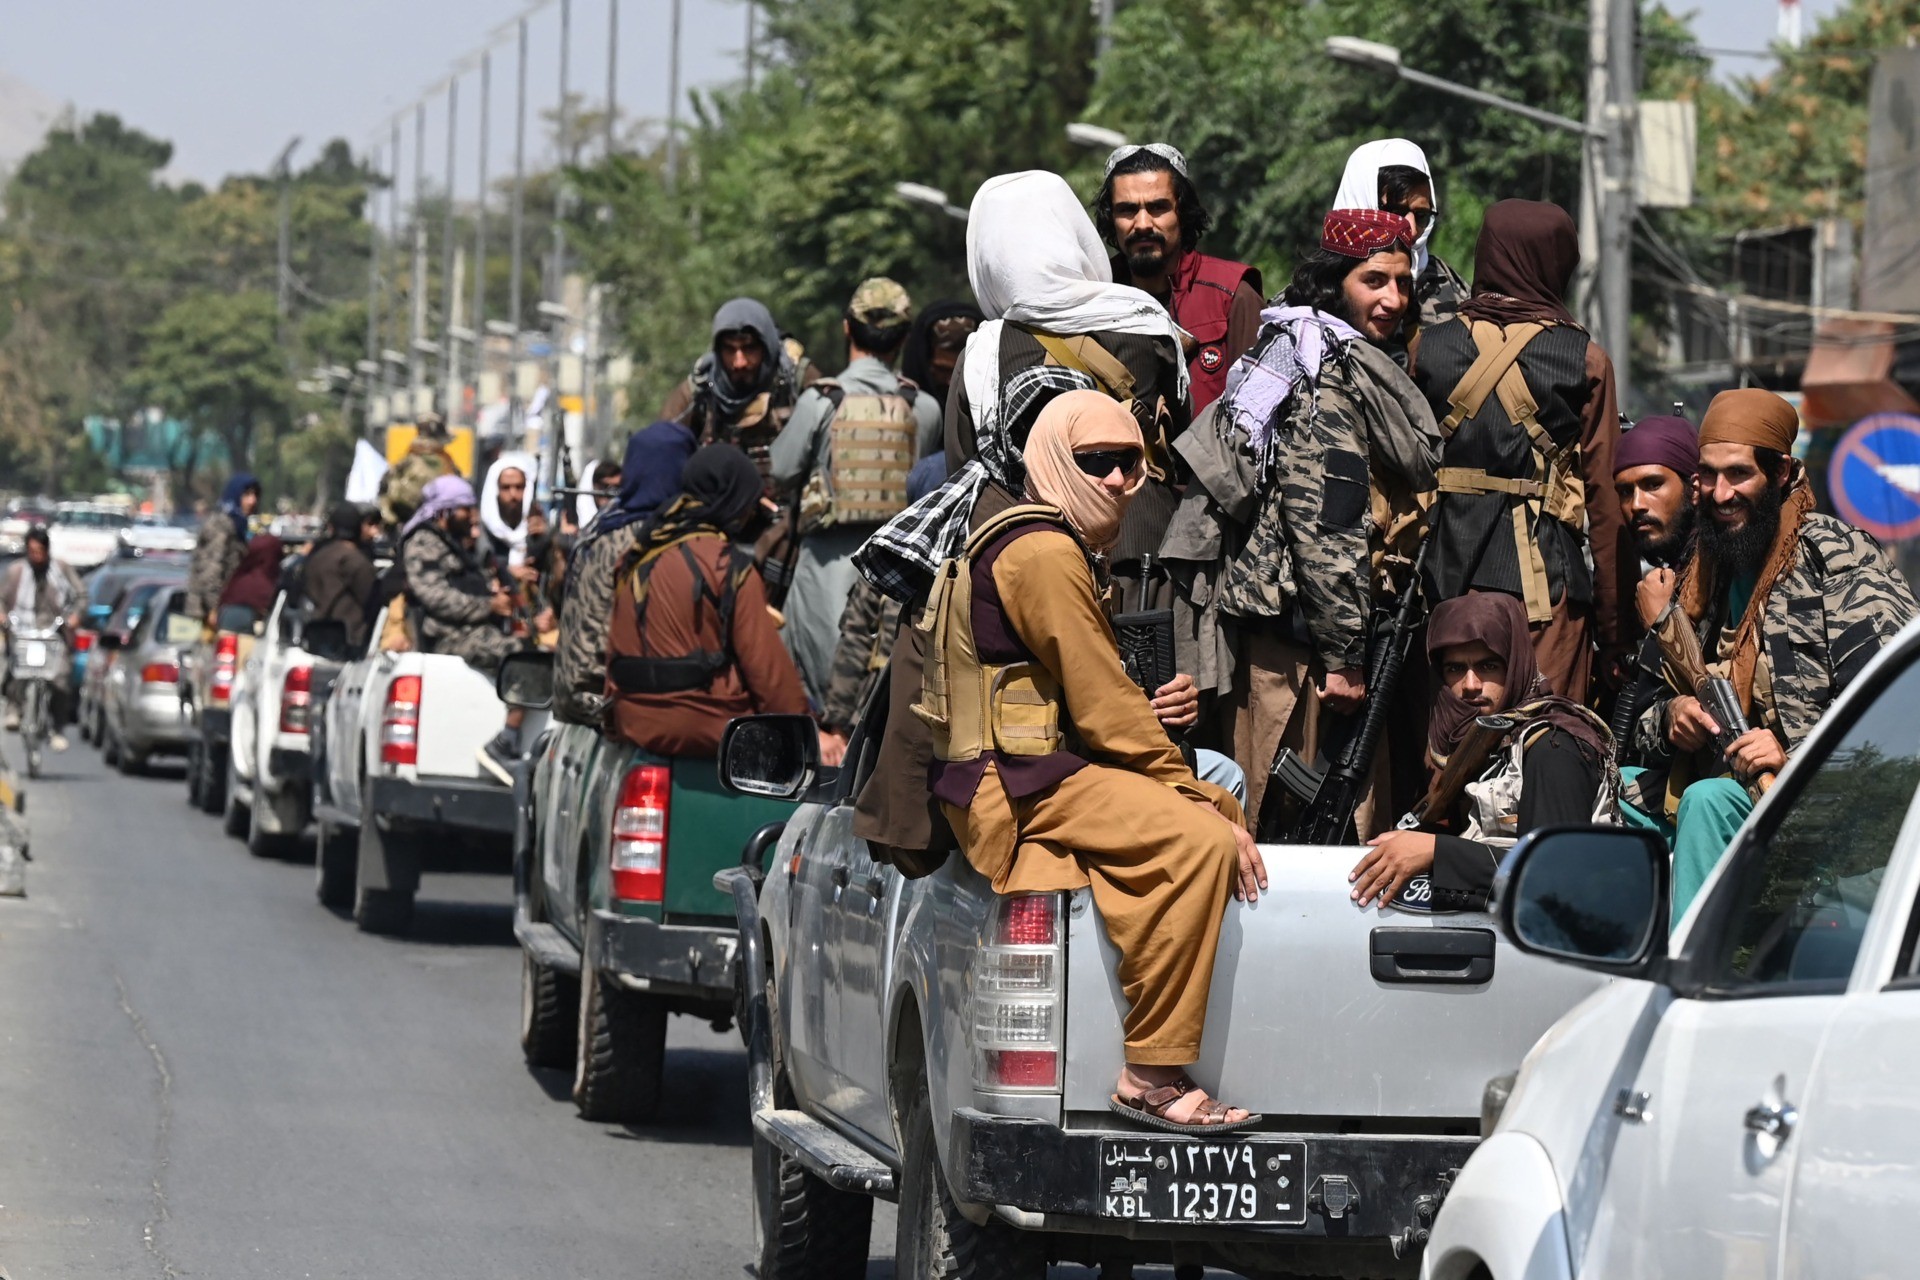 A convoy of Taliban fighters patrol along a street in Kabul on September 2, 2021. (Photo by Aamir QURESHI / AFP) (Photo by AAMIR QURESHI/AFP via Getty Images)